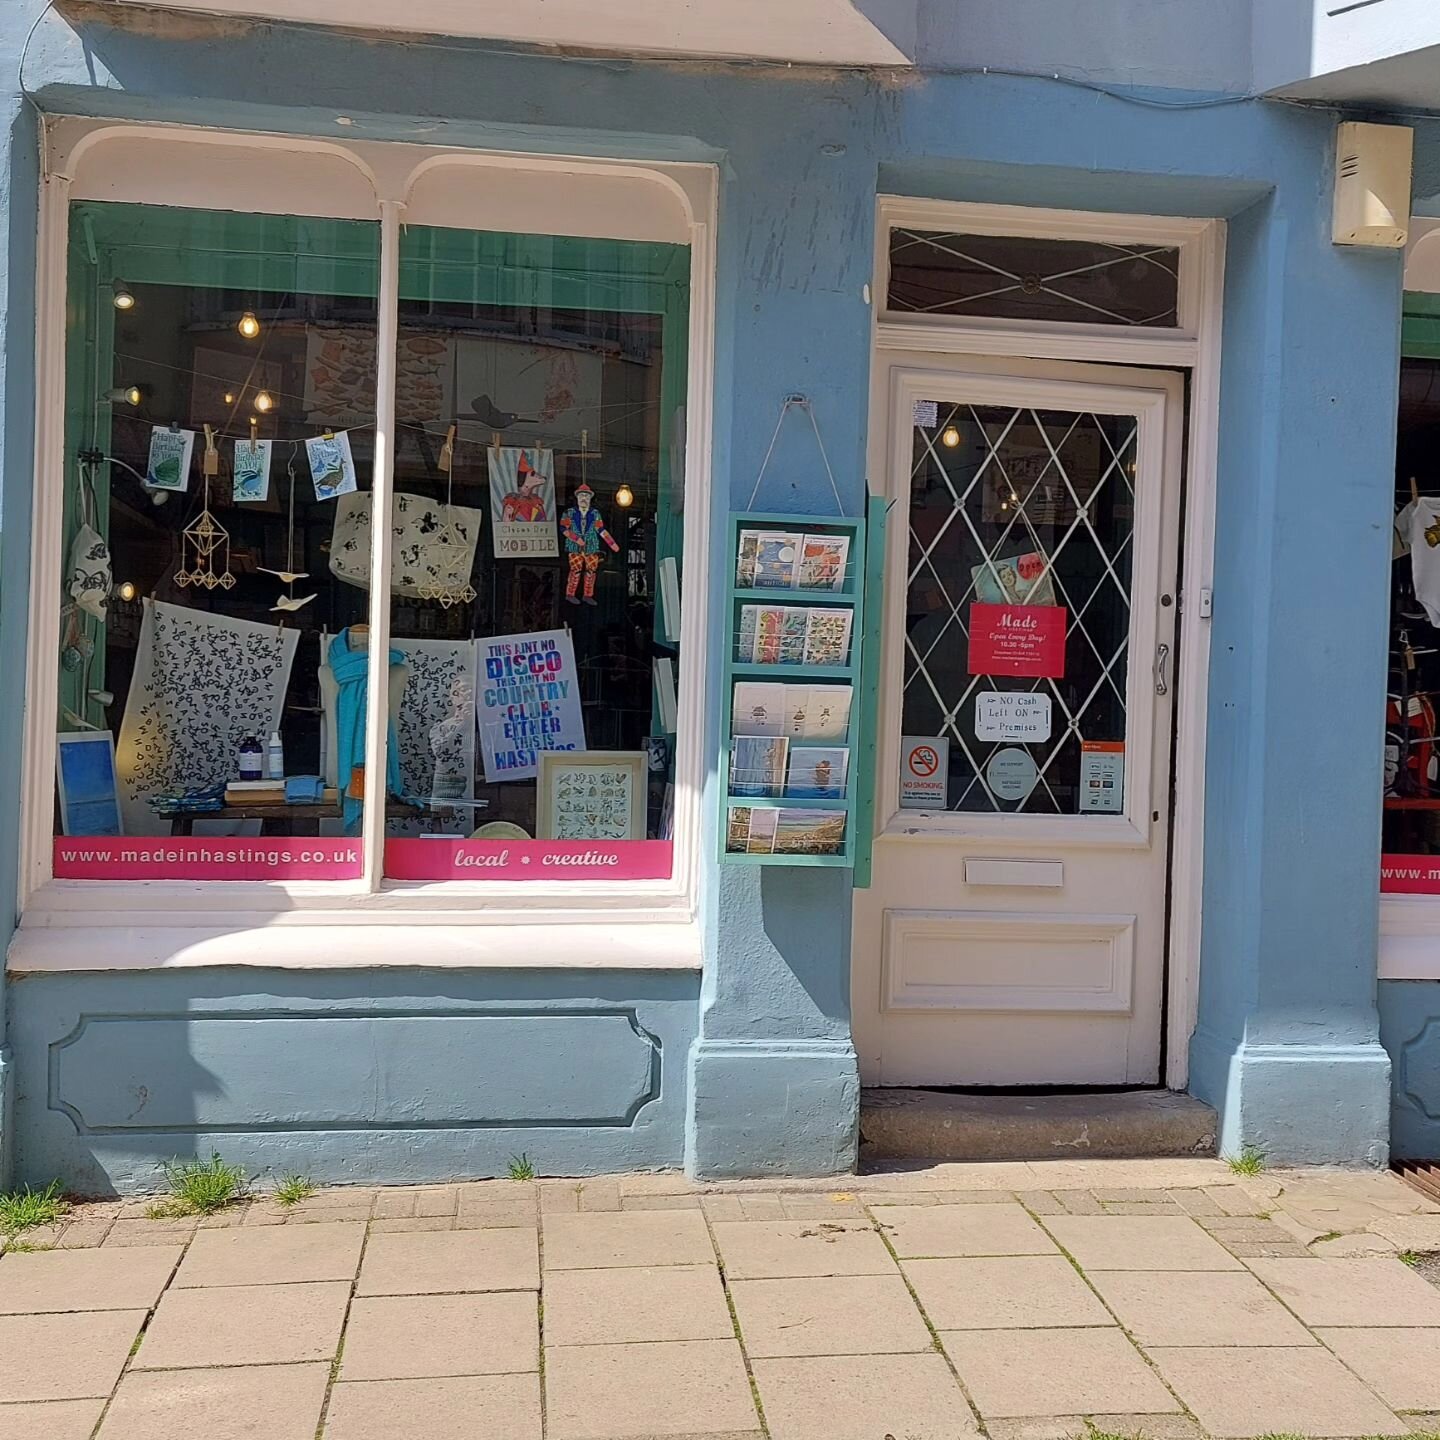 Delivering today to @made_in_hastings .My very first stockist 5 years ago who still do a great job selling my products. As of today they are all stocked up with my new packaging of the candles and diffusers, which look amazing against their colourful